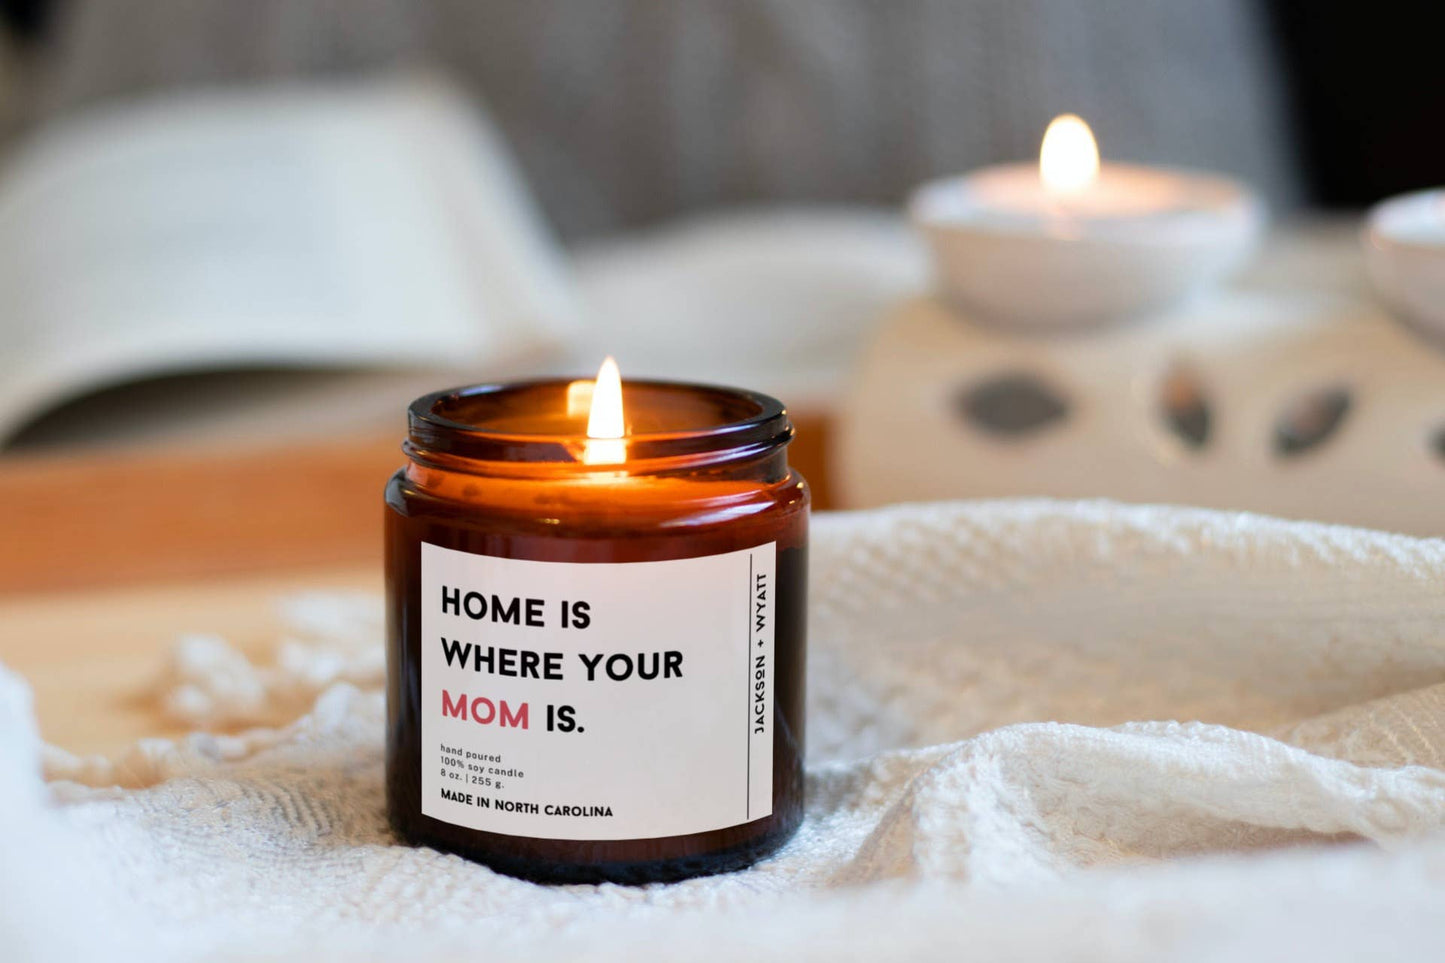 Mom Candle Mother's Day Gift Home is where your mom is